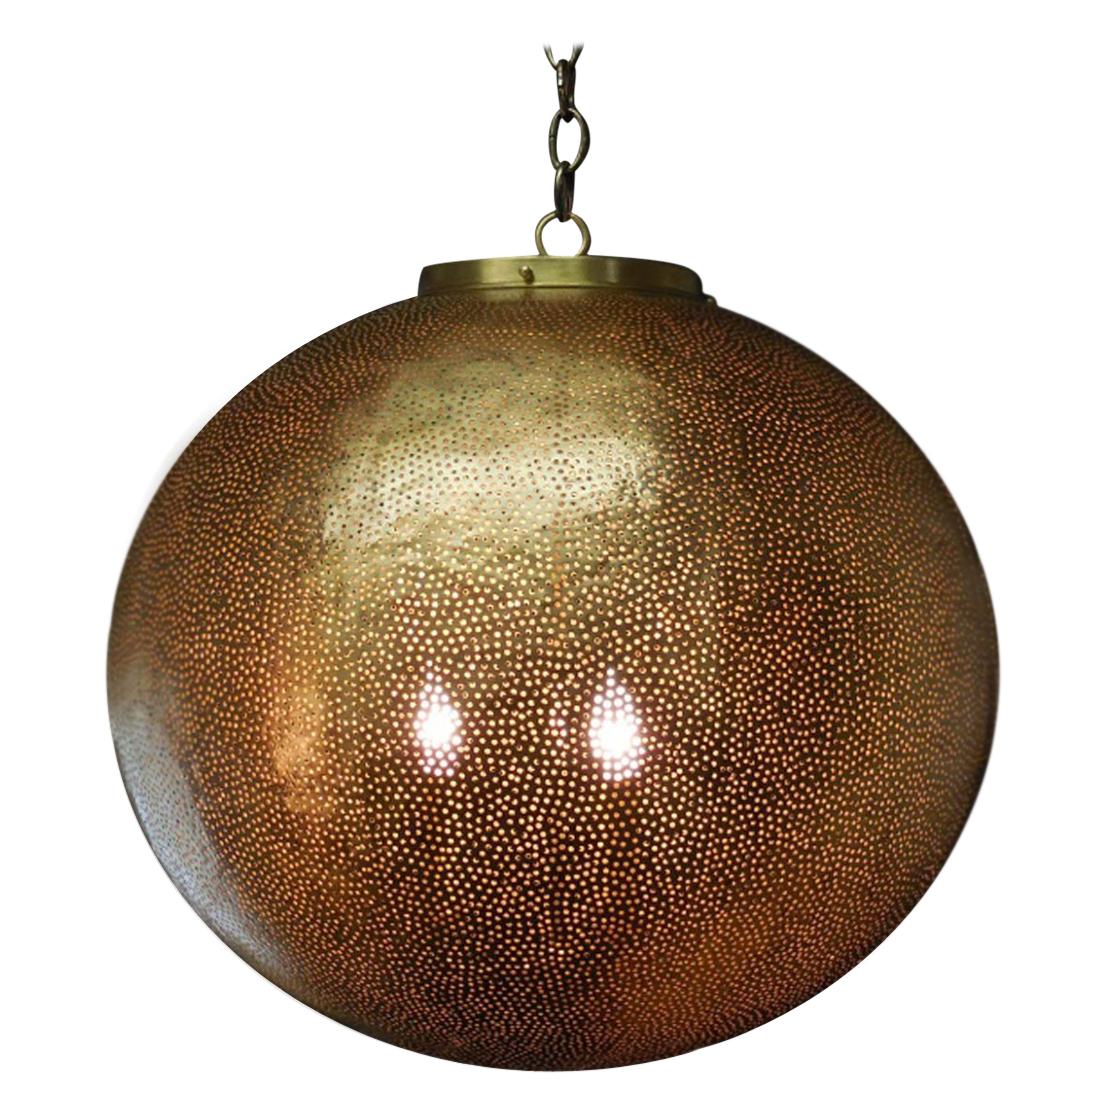 Hand-Hammered Moroccan Large Scale Lantern